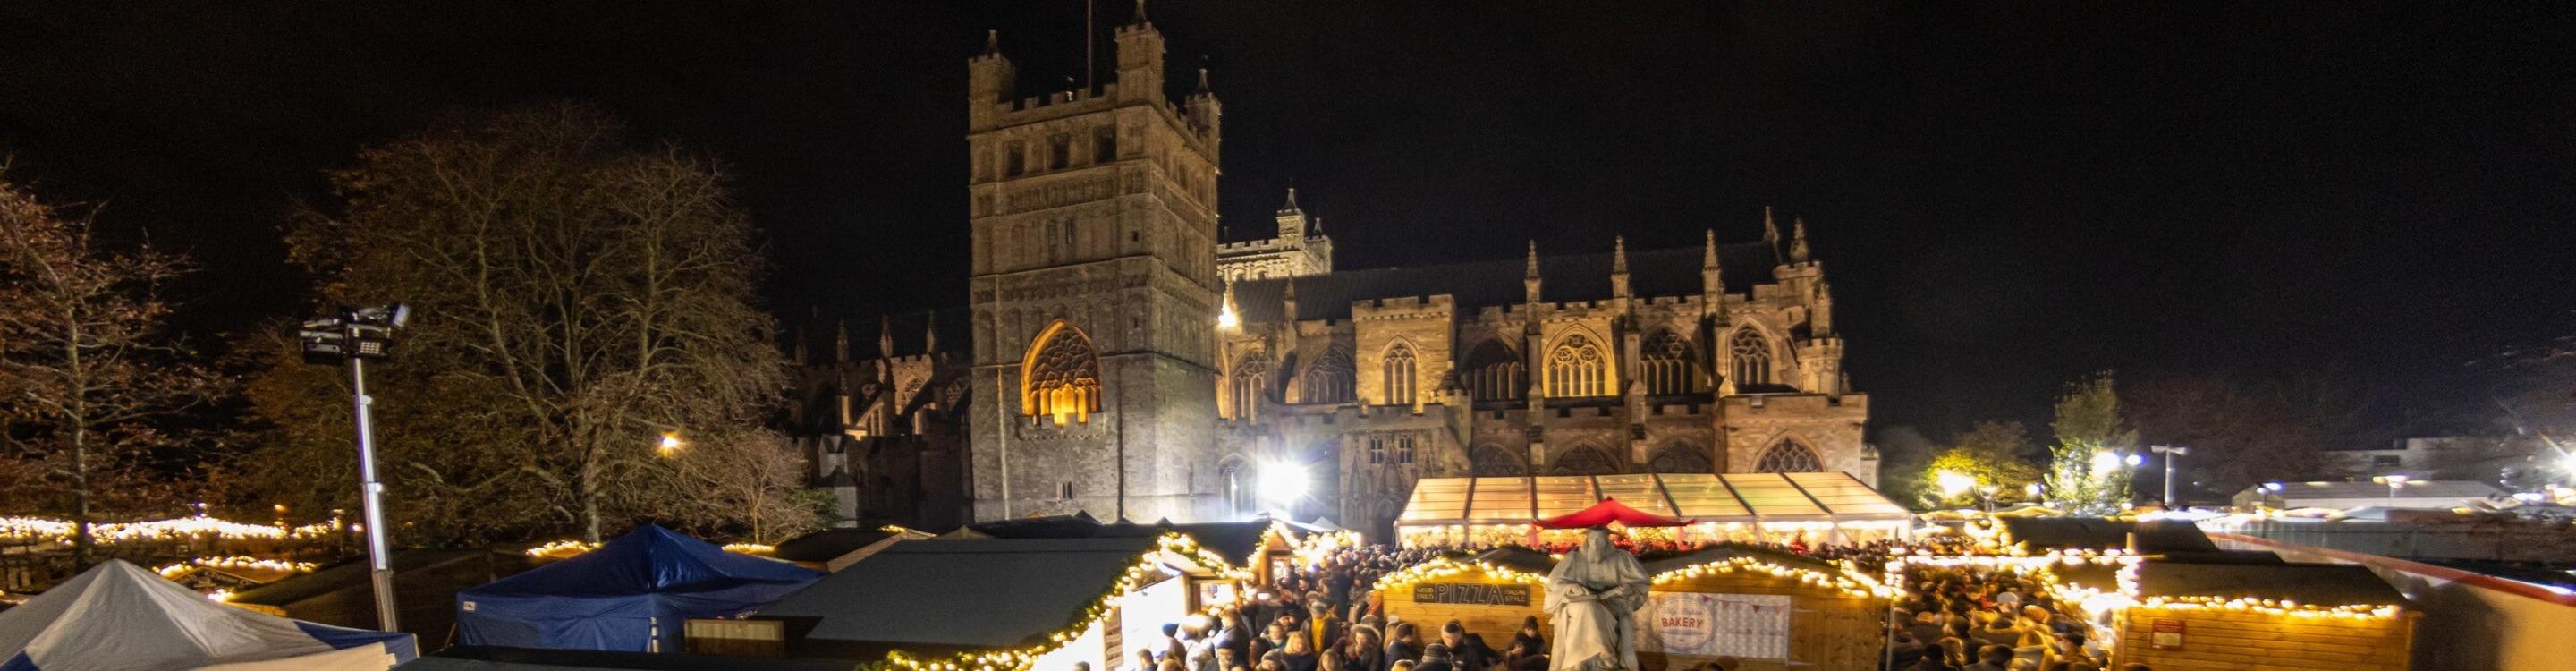 Christmas stalls set against the backdrop of Exeter Cathedral at night